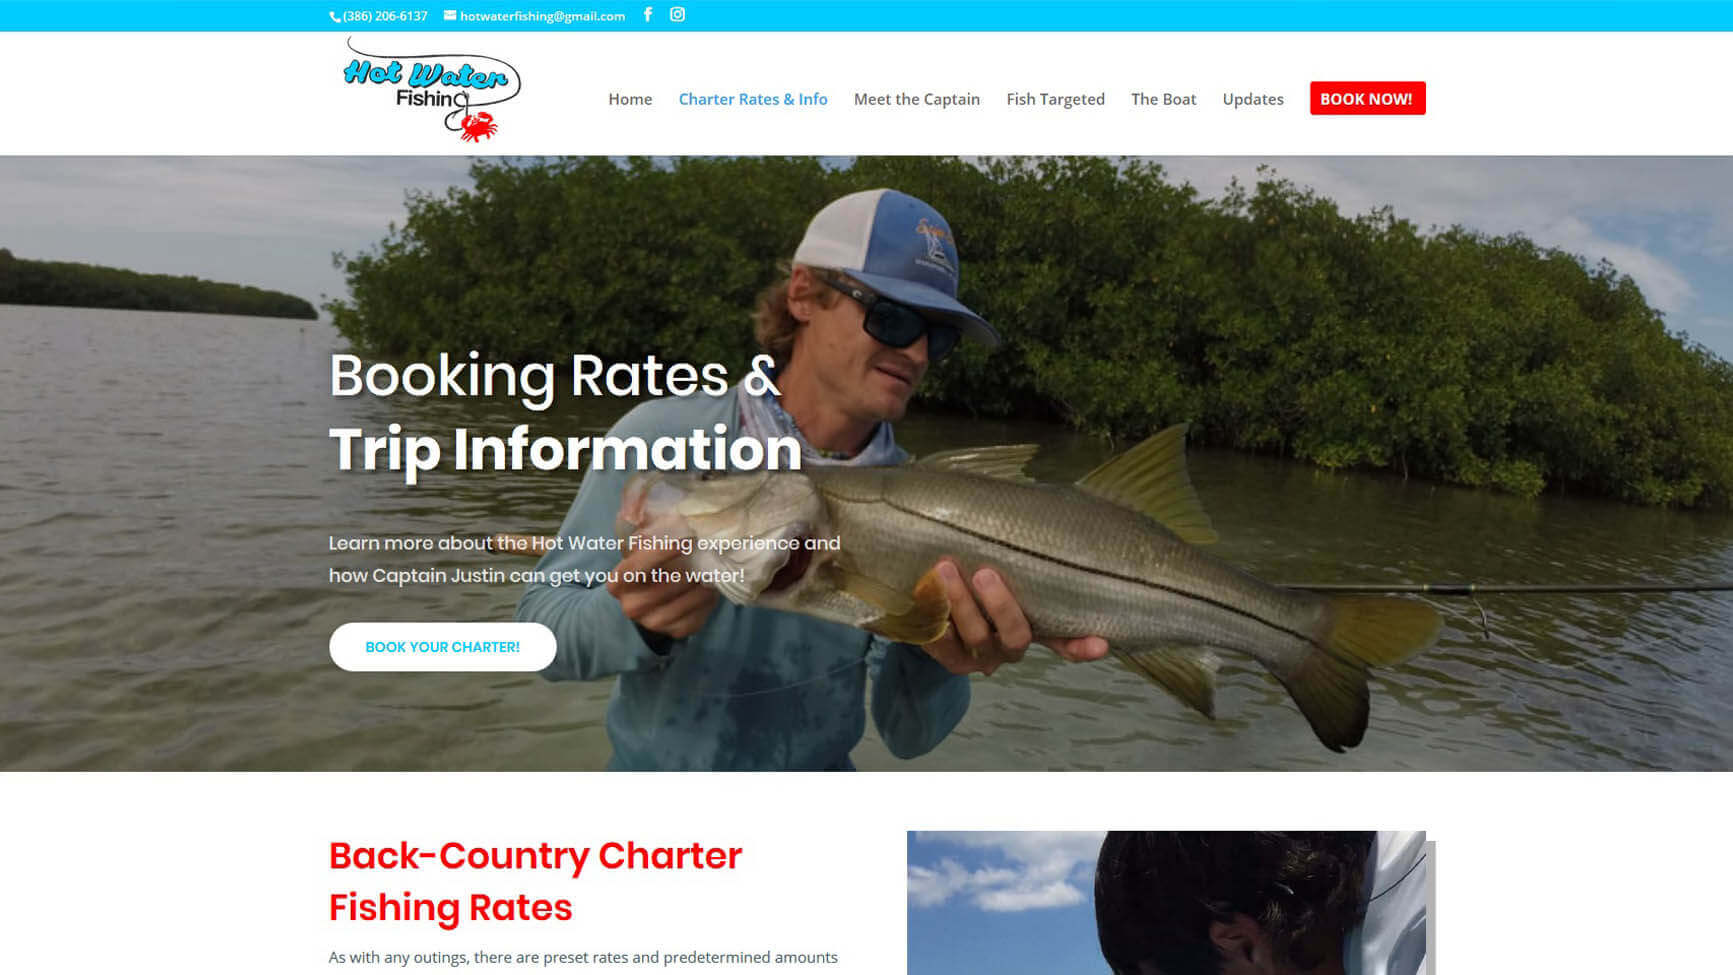 An image of the trip information page of Hot Water Fishing, website created by Not Fade Away Marketing